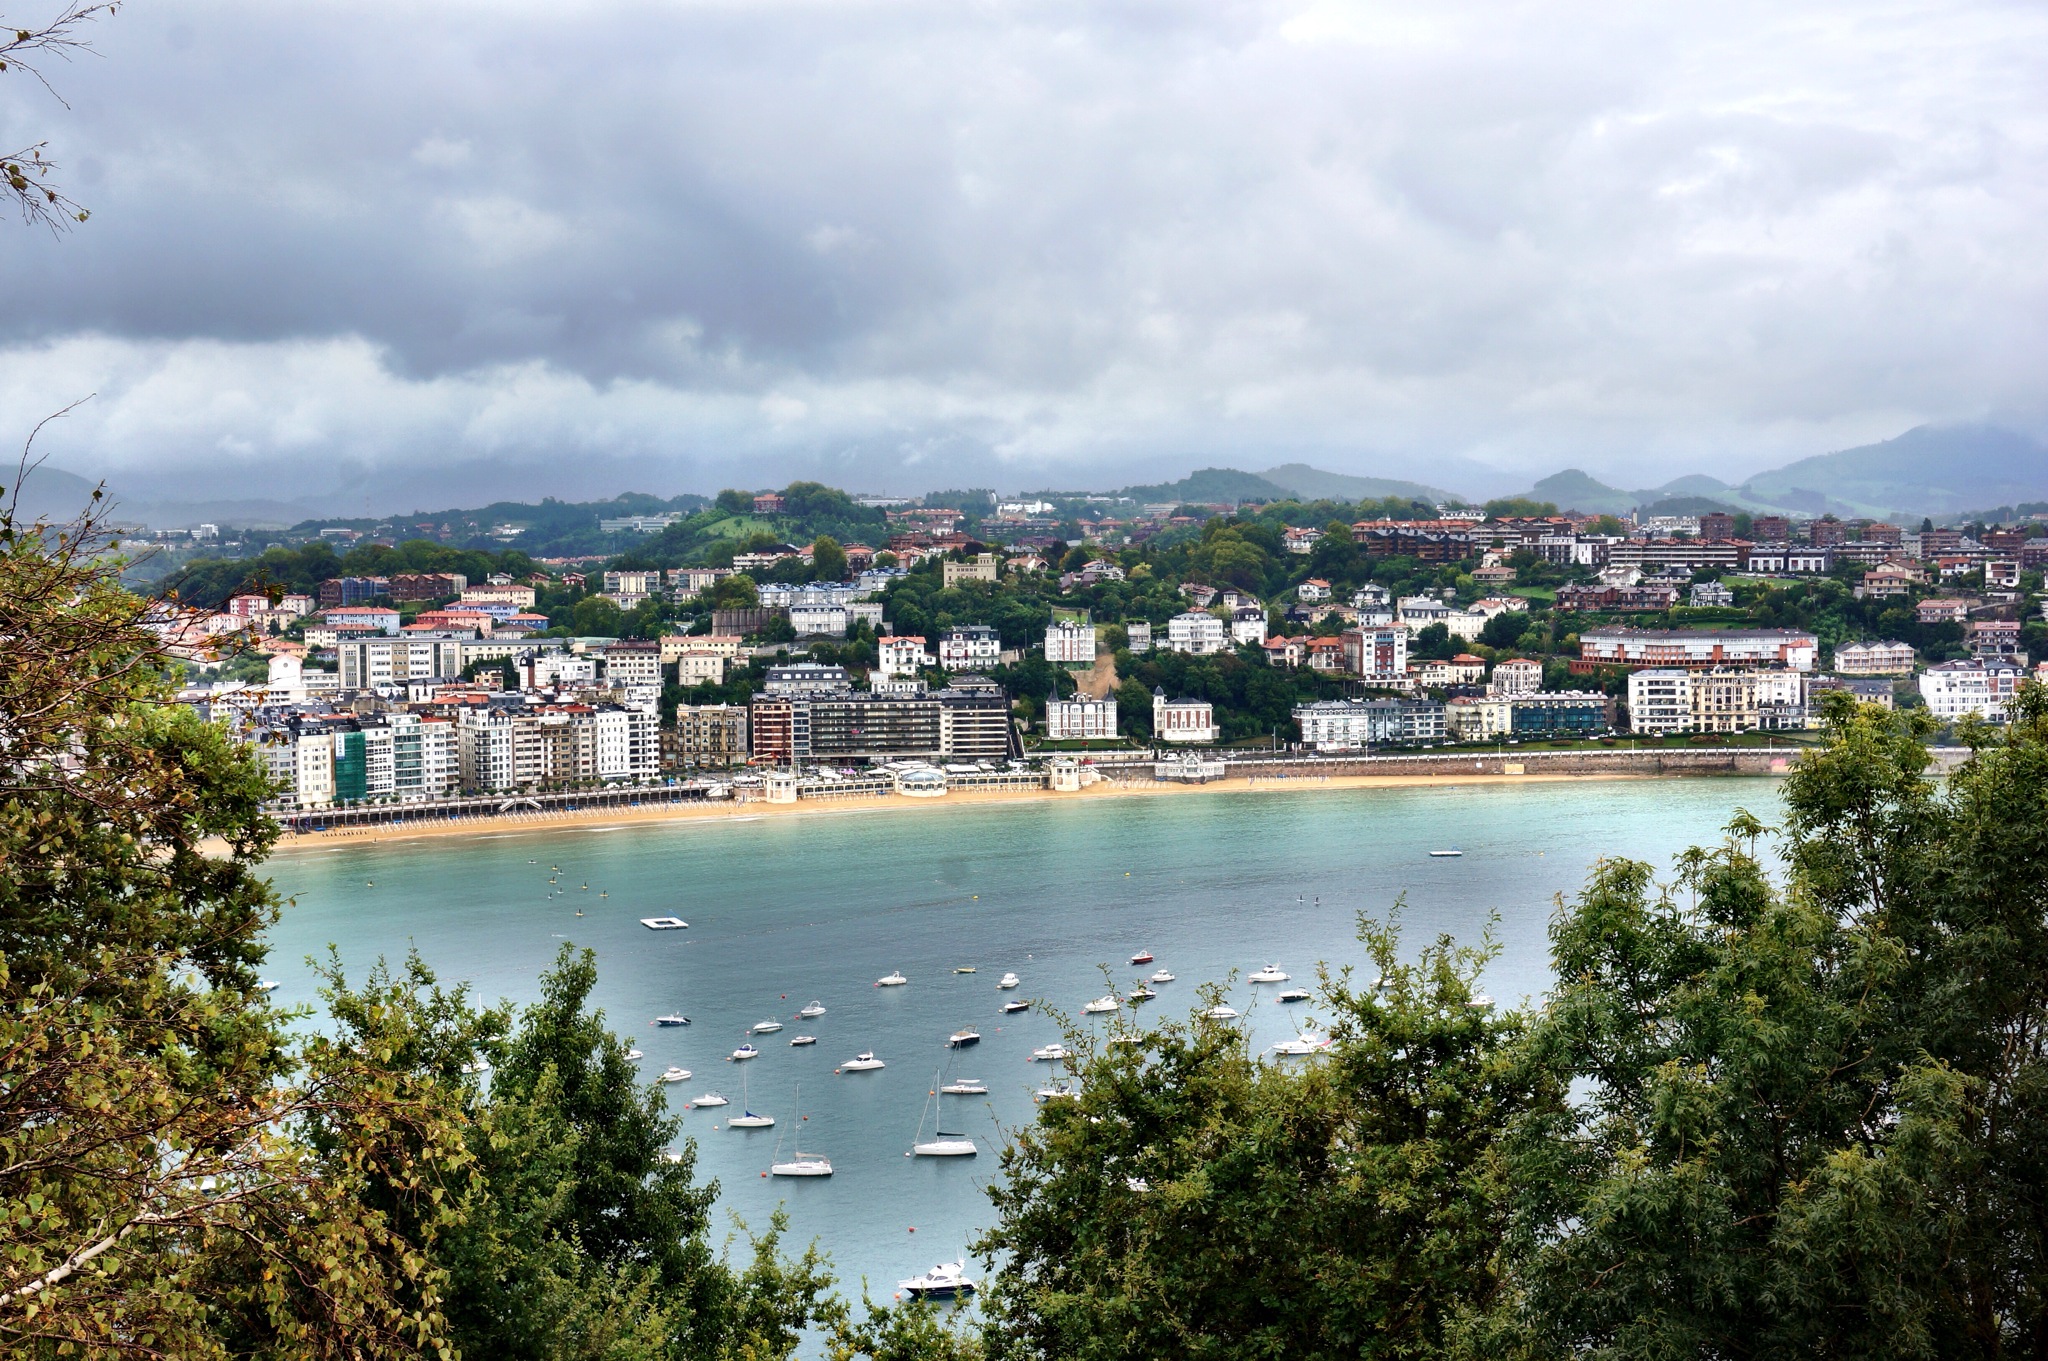 San Sebastián is a small beach town in northern Spain just over the border from Hendaye, France. It is fairly expensive and a pretty popular destination for the French and the Spanish.